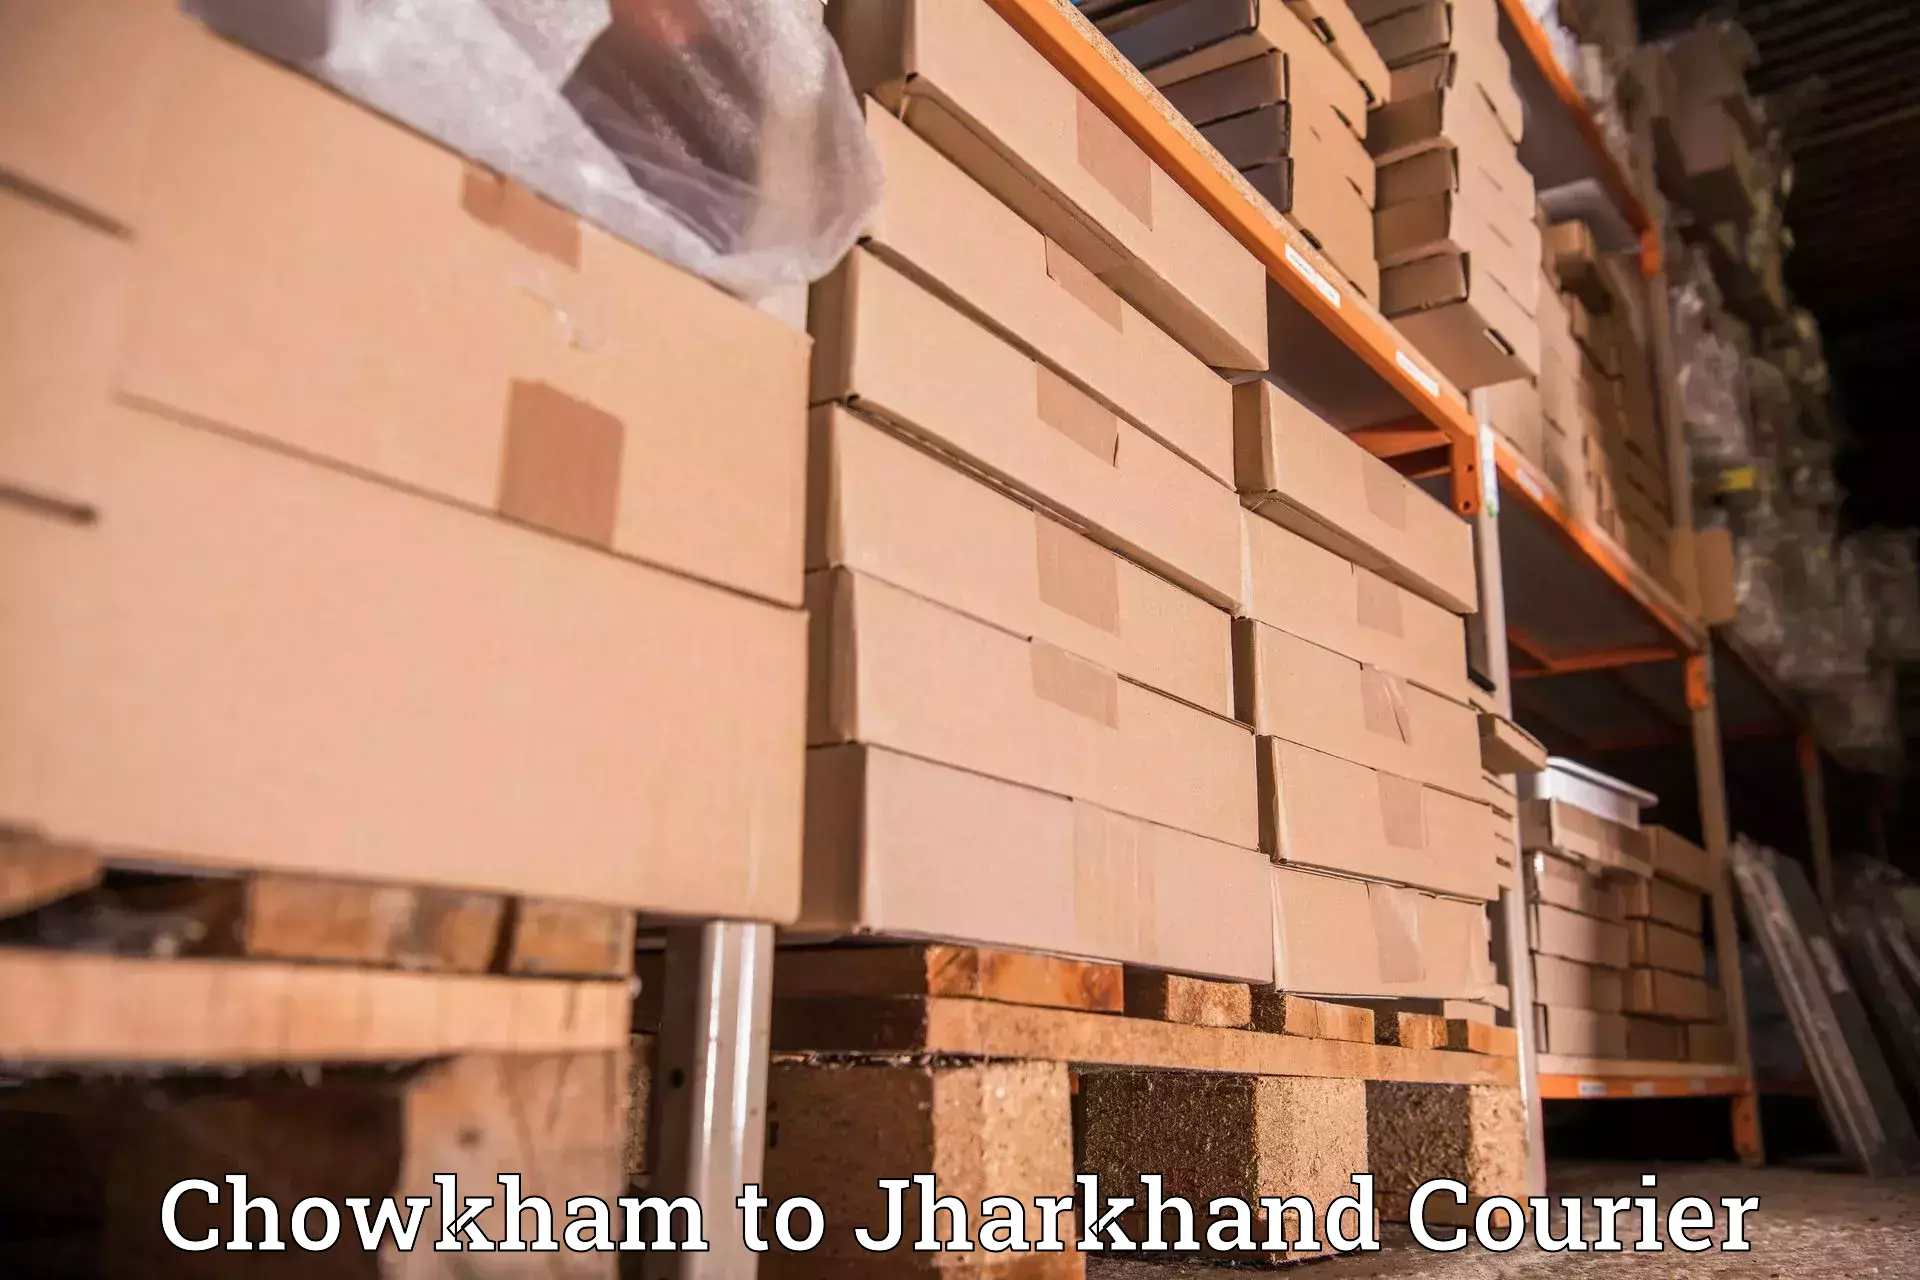 Reliable courier service in Chowkham to Panki Palamu